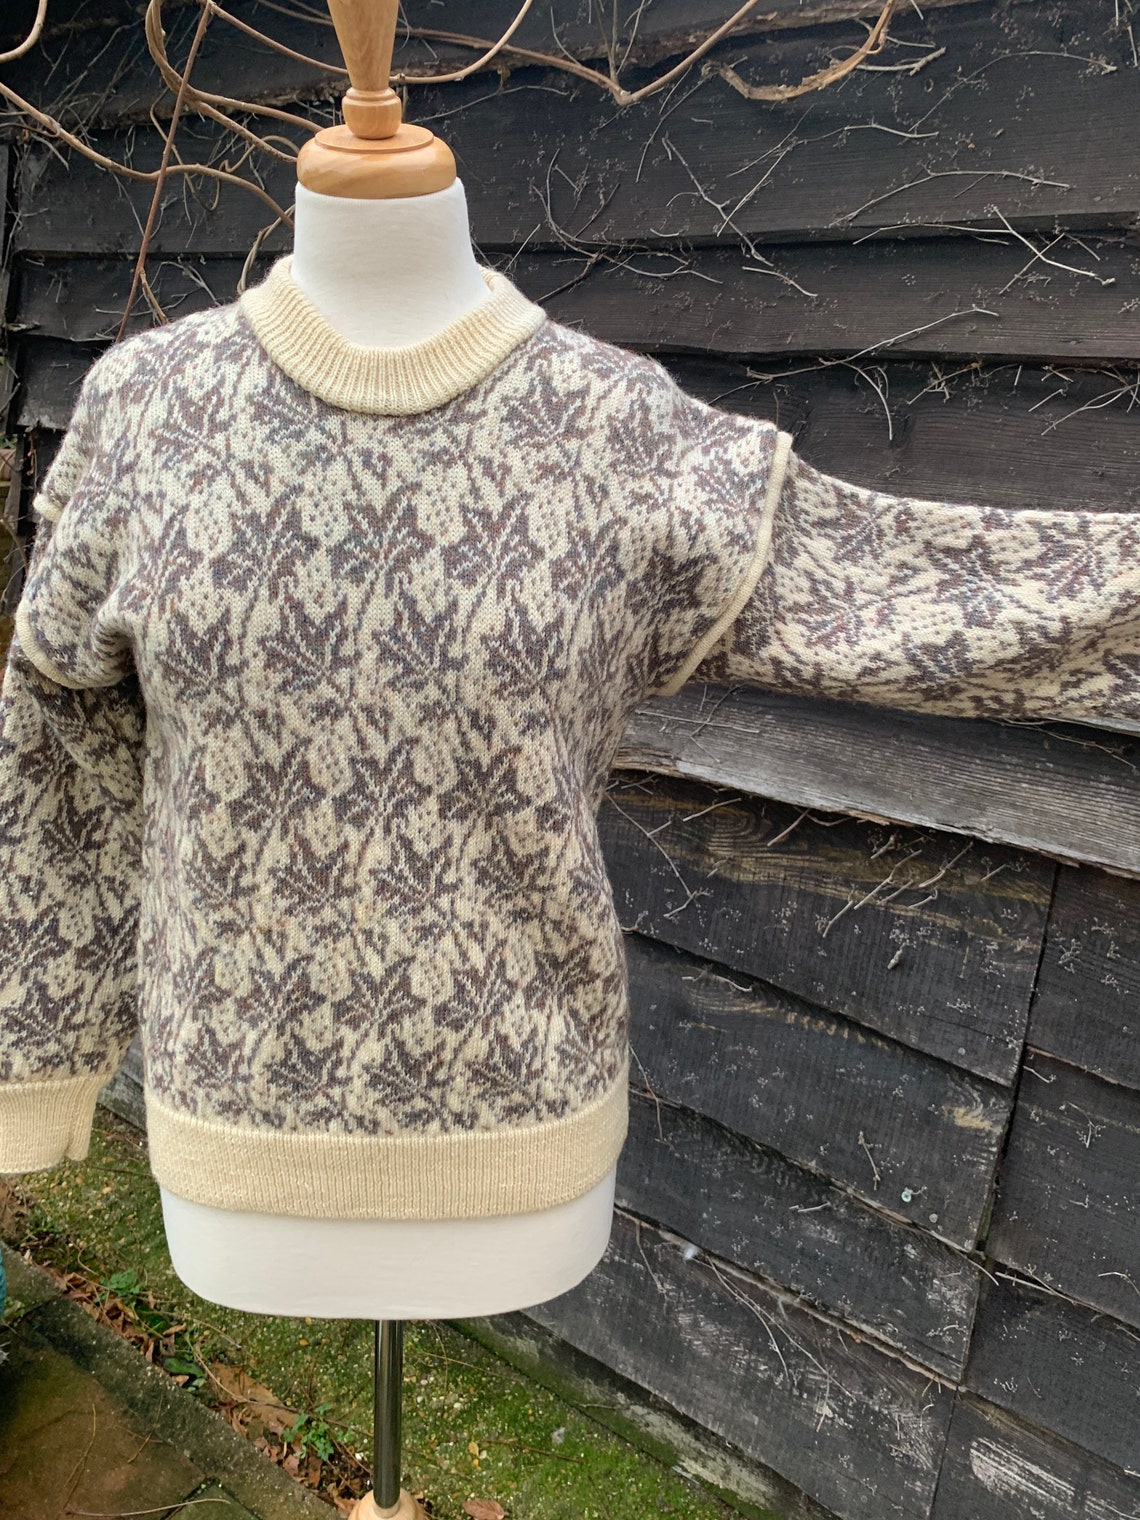 Traditional pure wool Fairisle knitted cream and grey pullover | Etsy